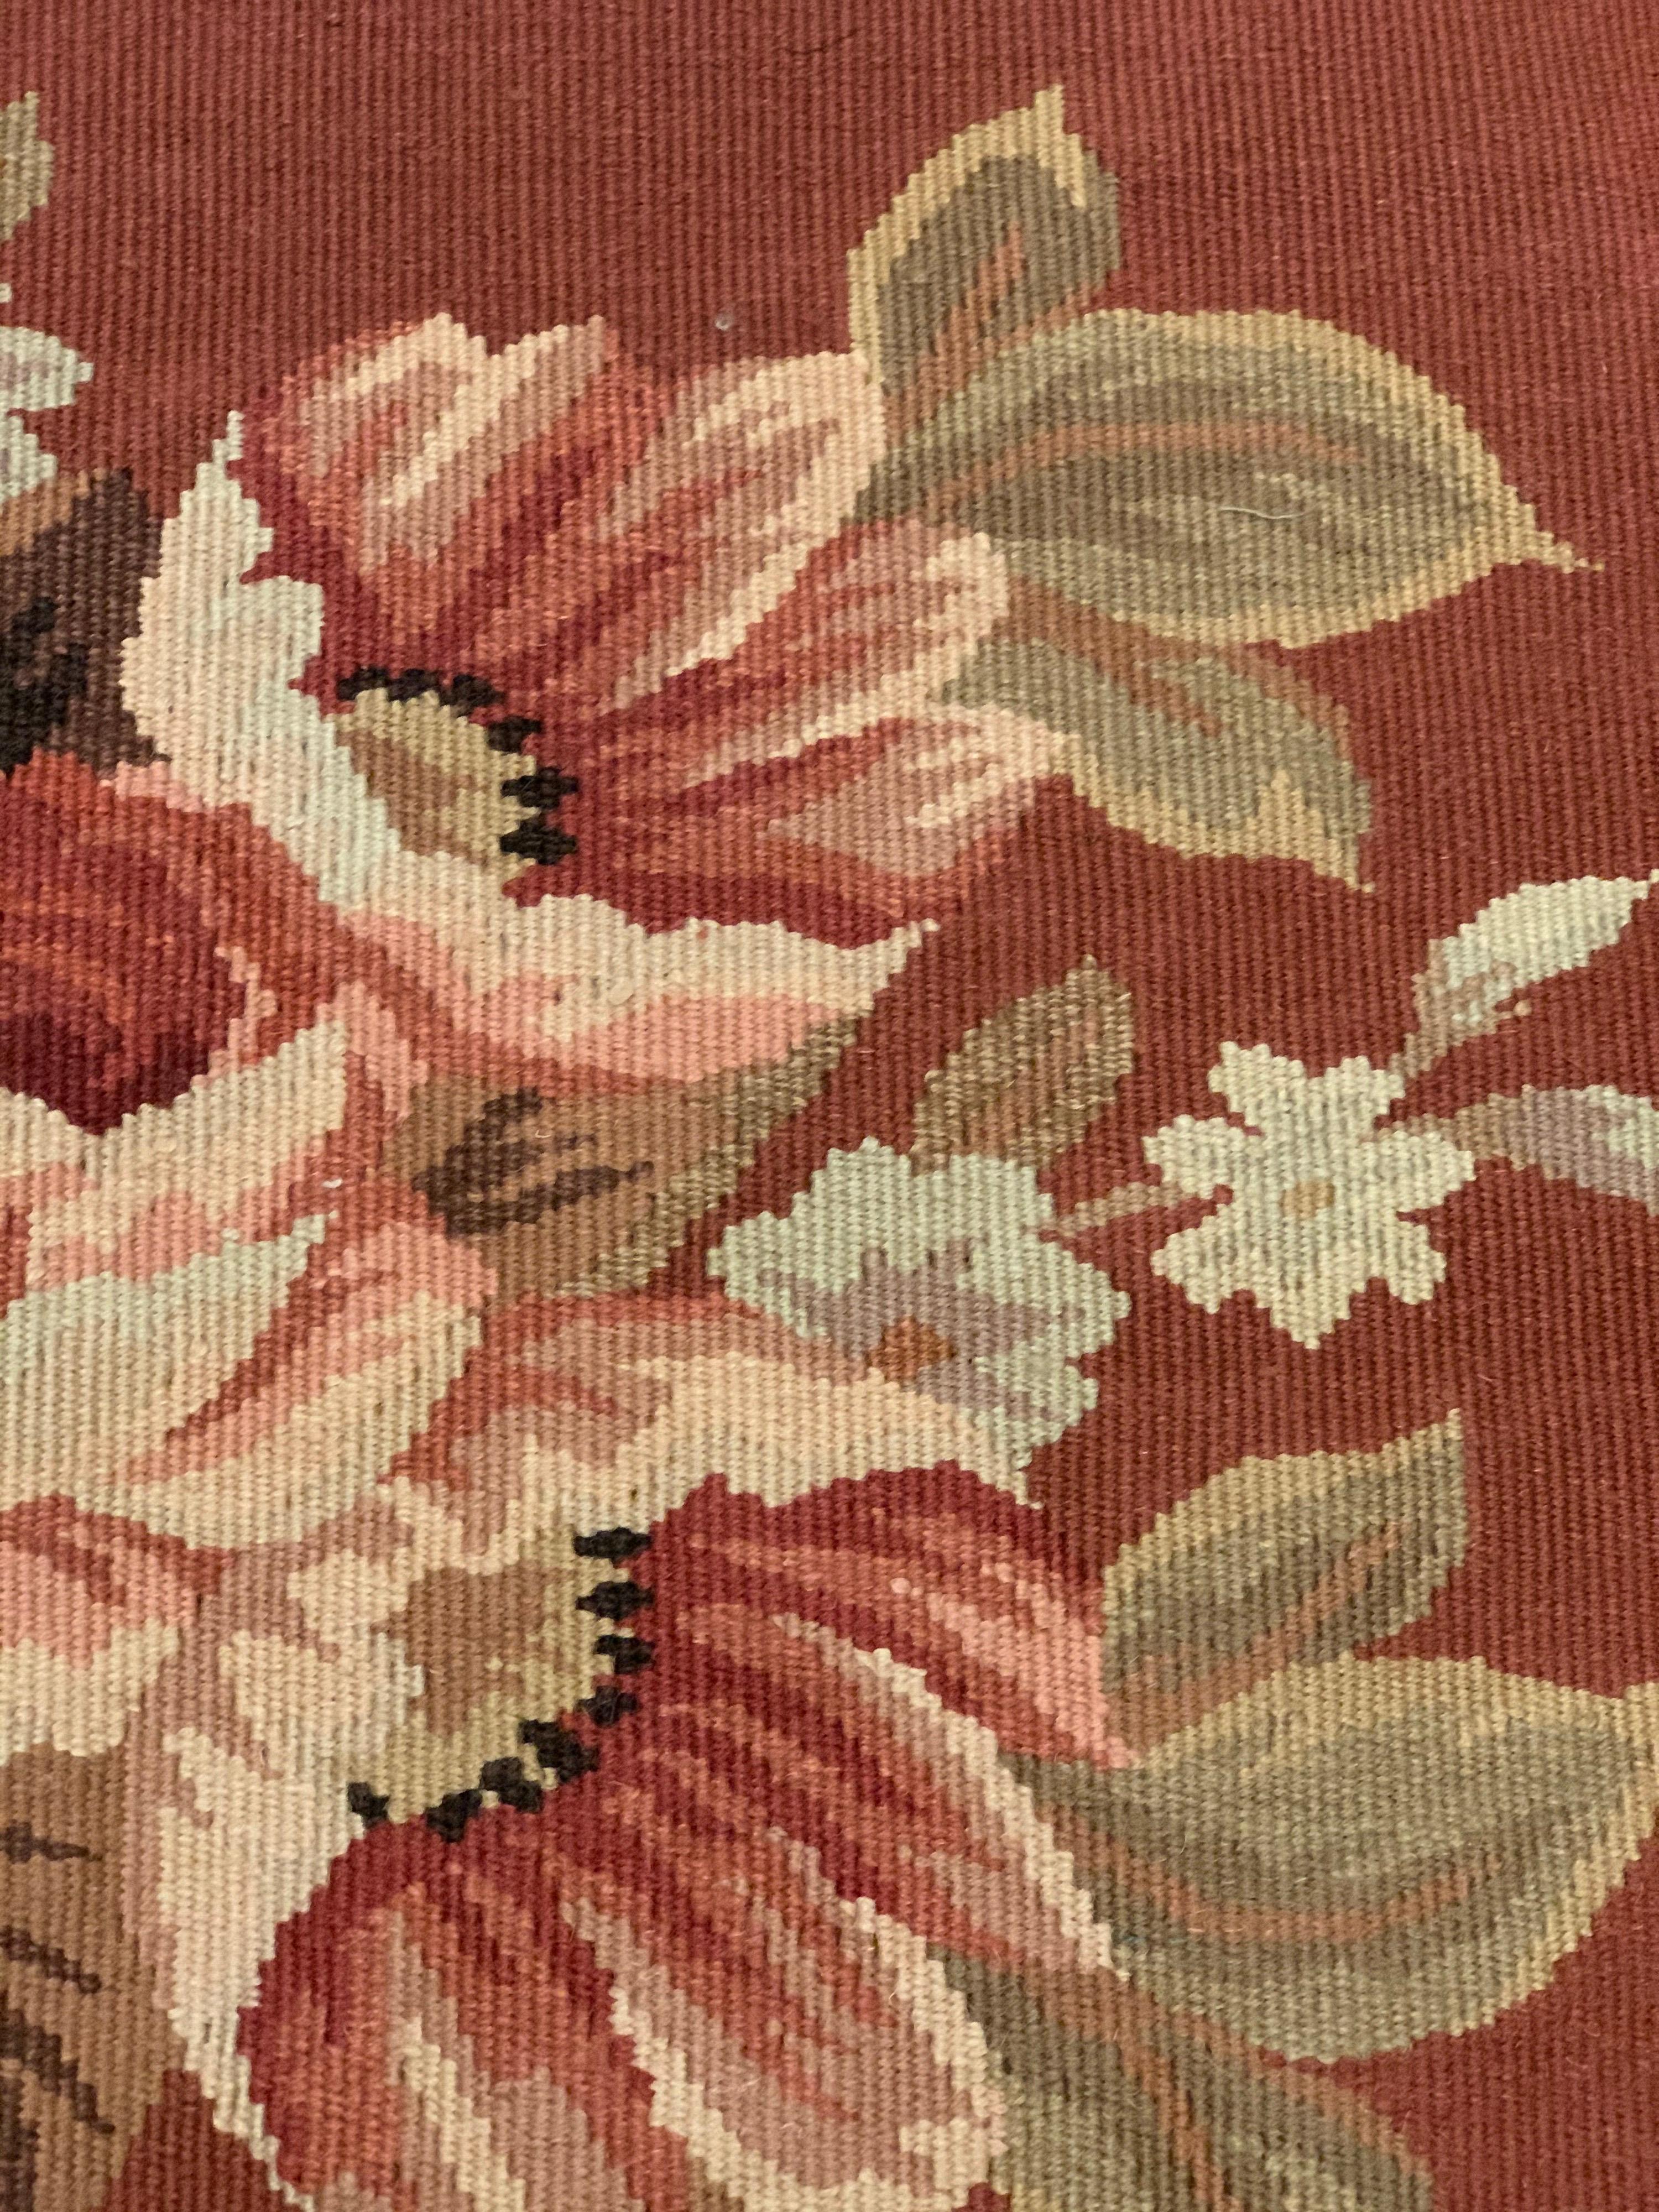 Floral French Provincial Needlepoint Lumbar Pillow In Excellent Condition For Sale In New York, NY